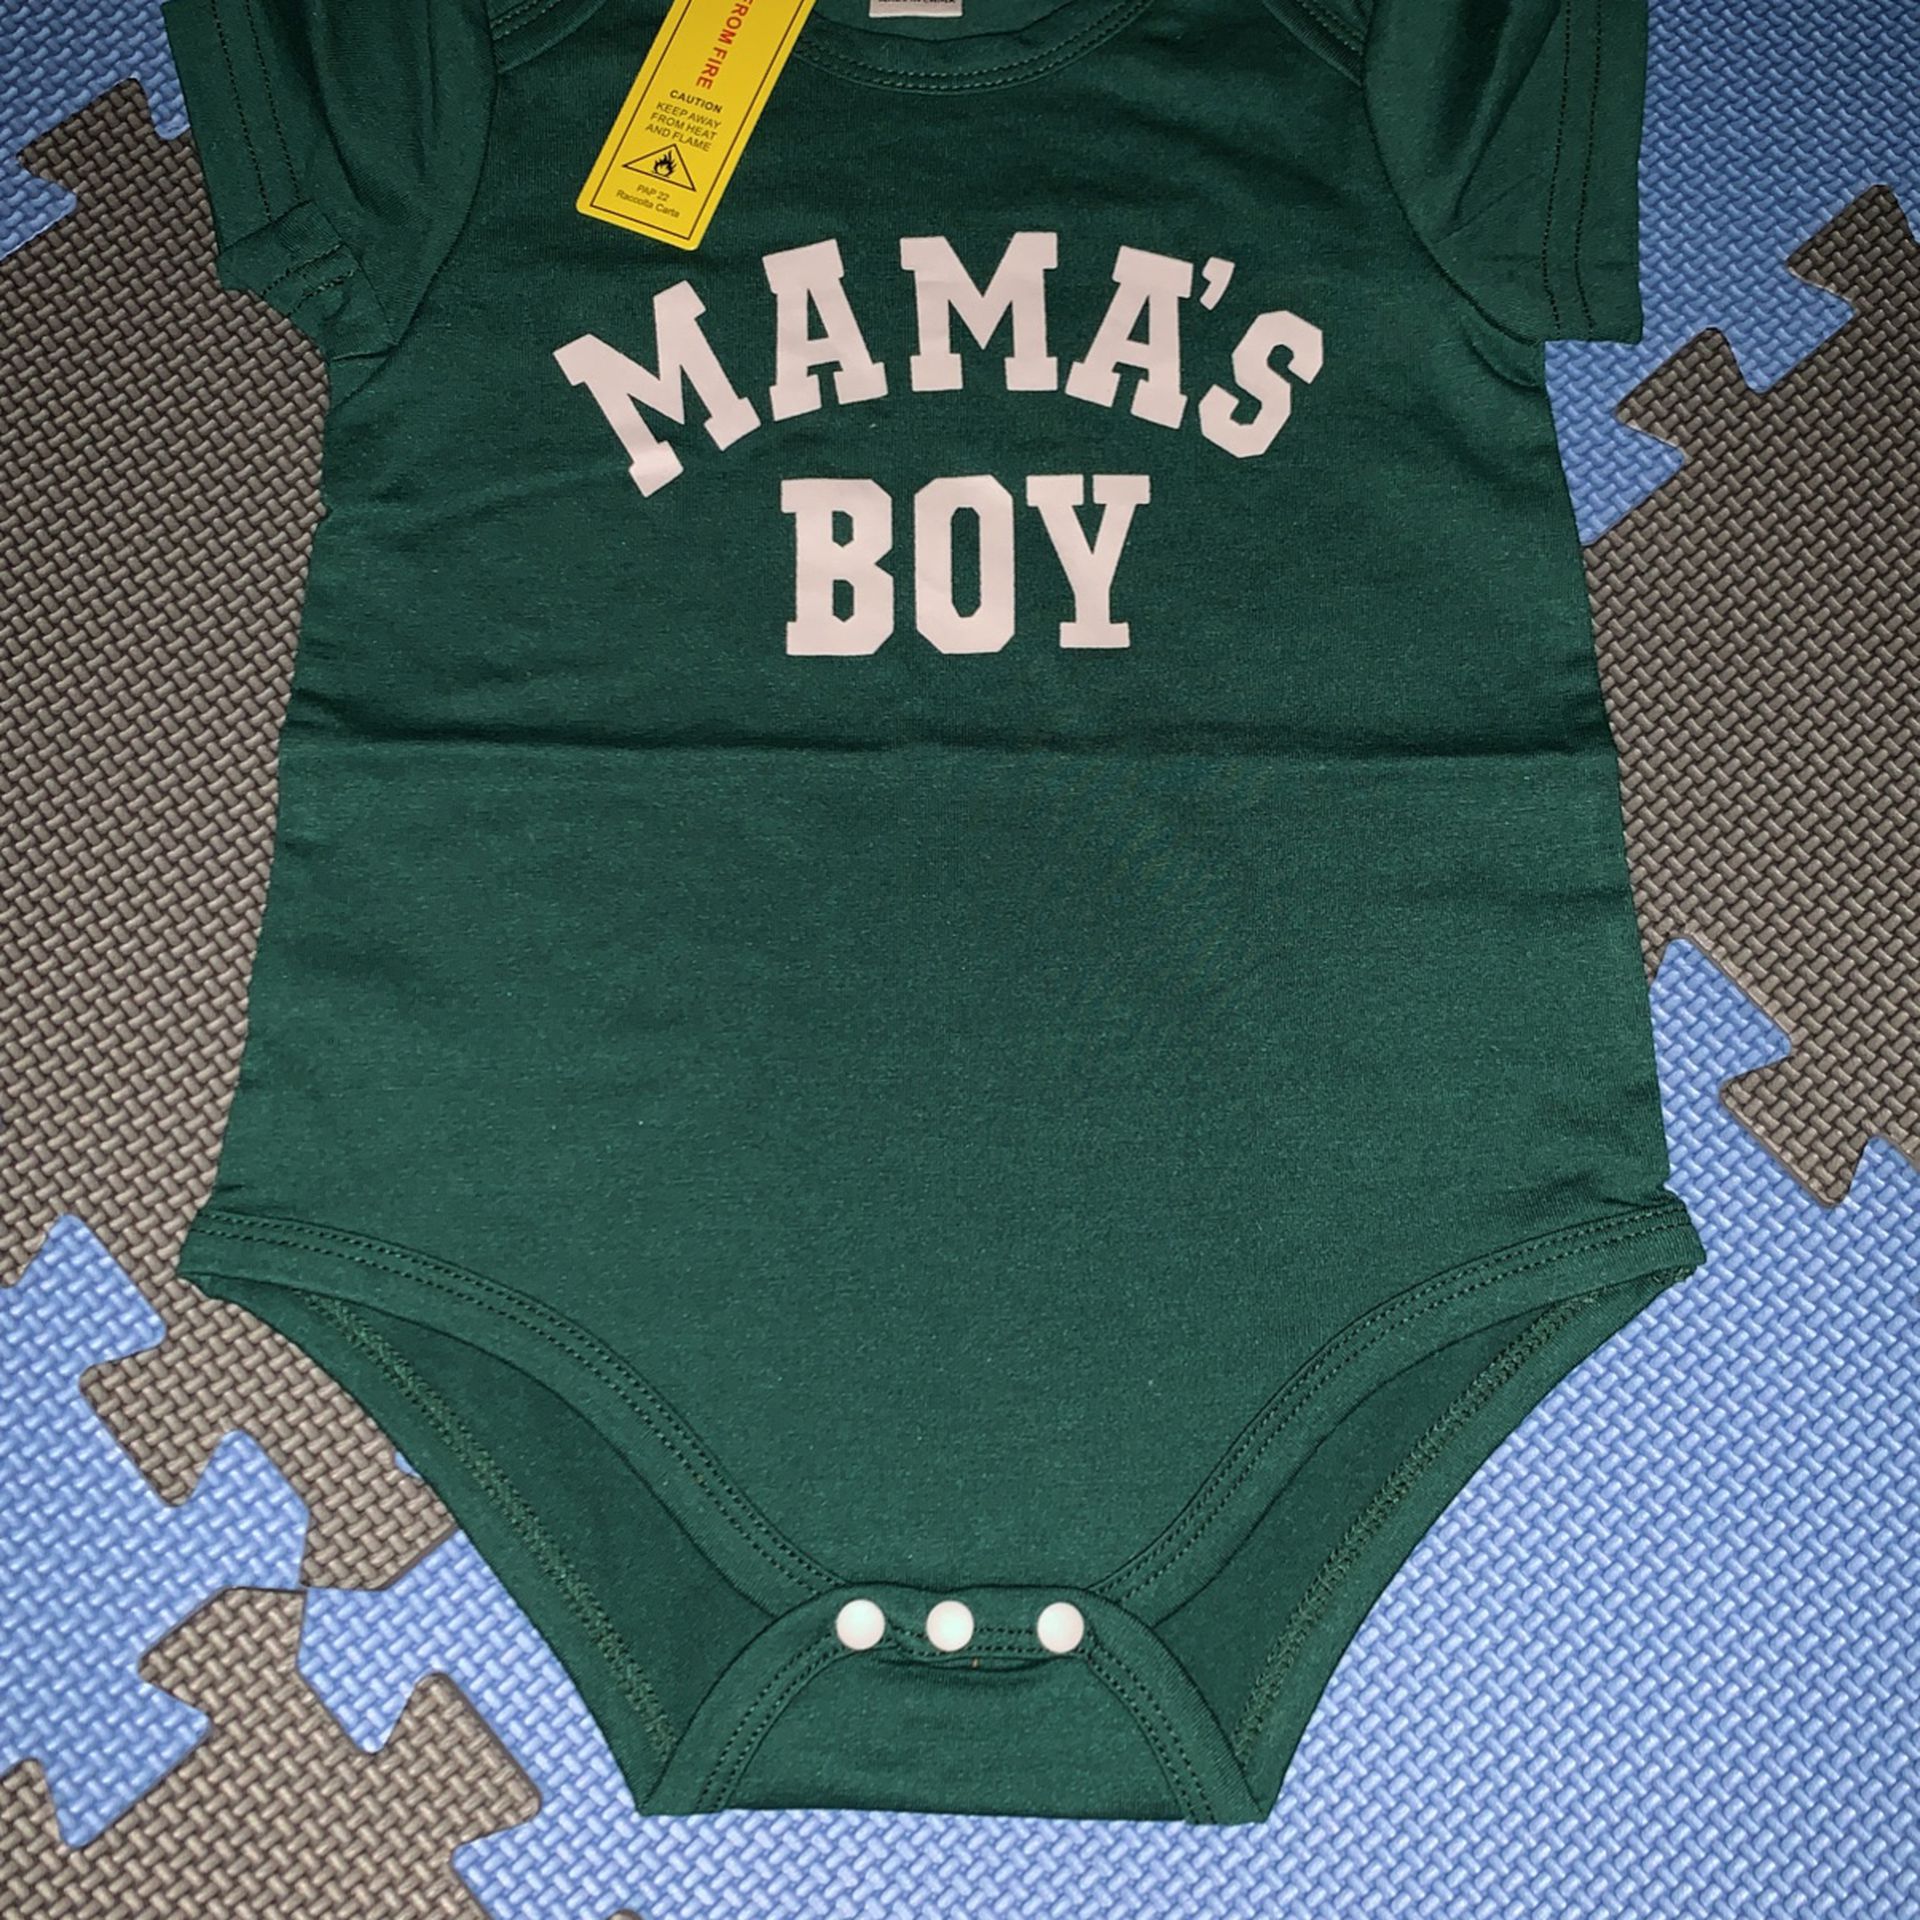 Brand New 9-12 Months Body Suit for Baby Boy 